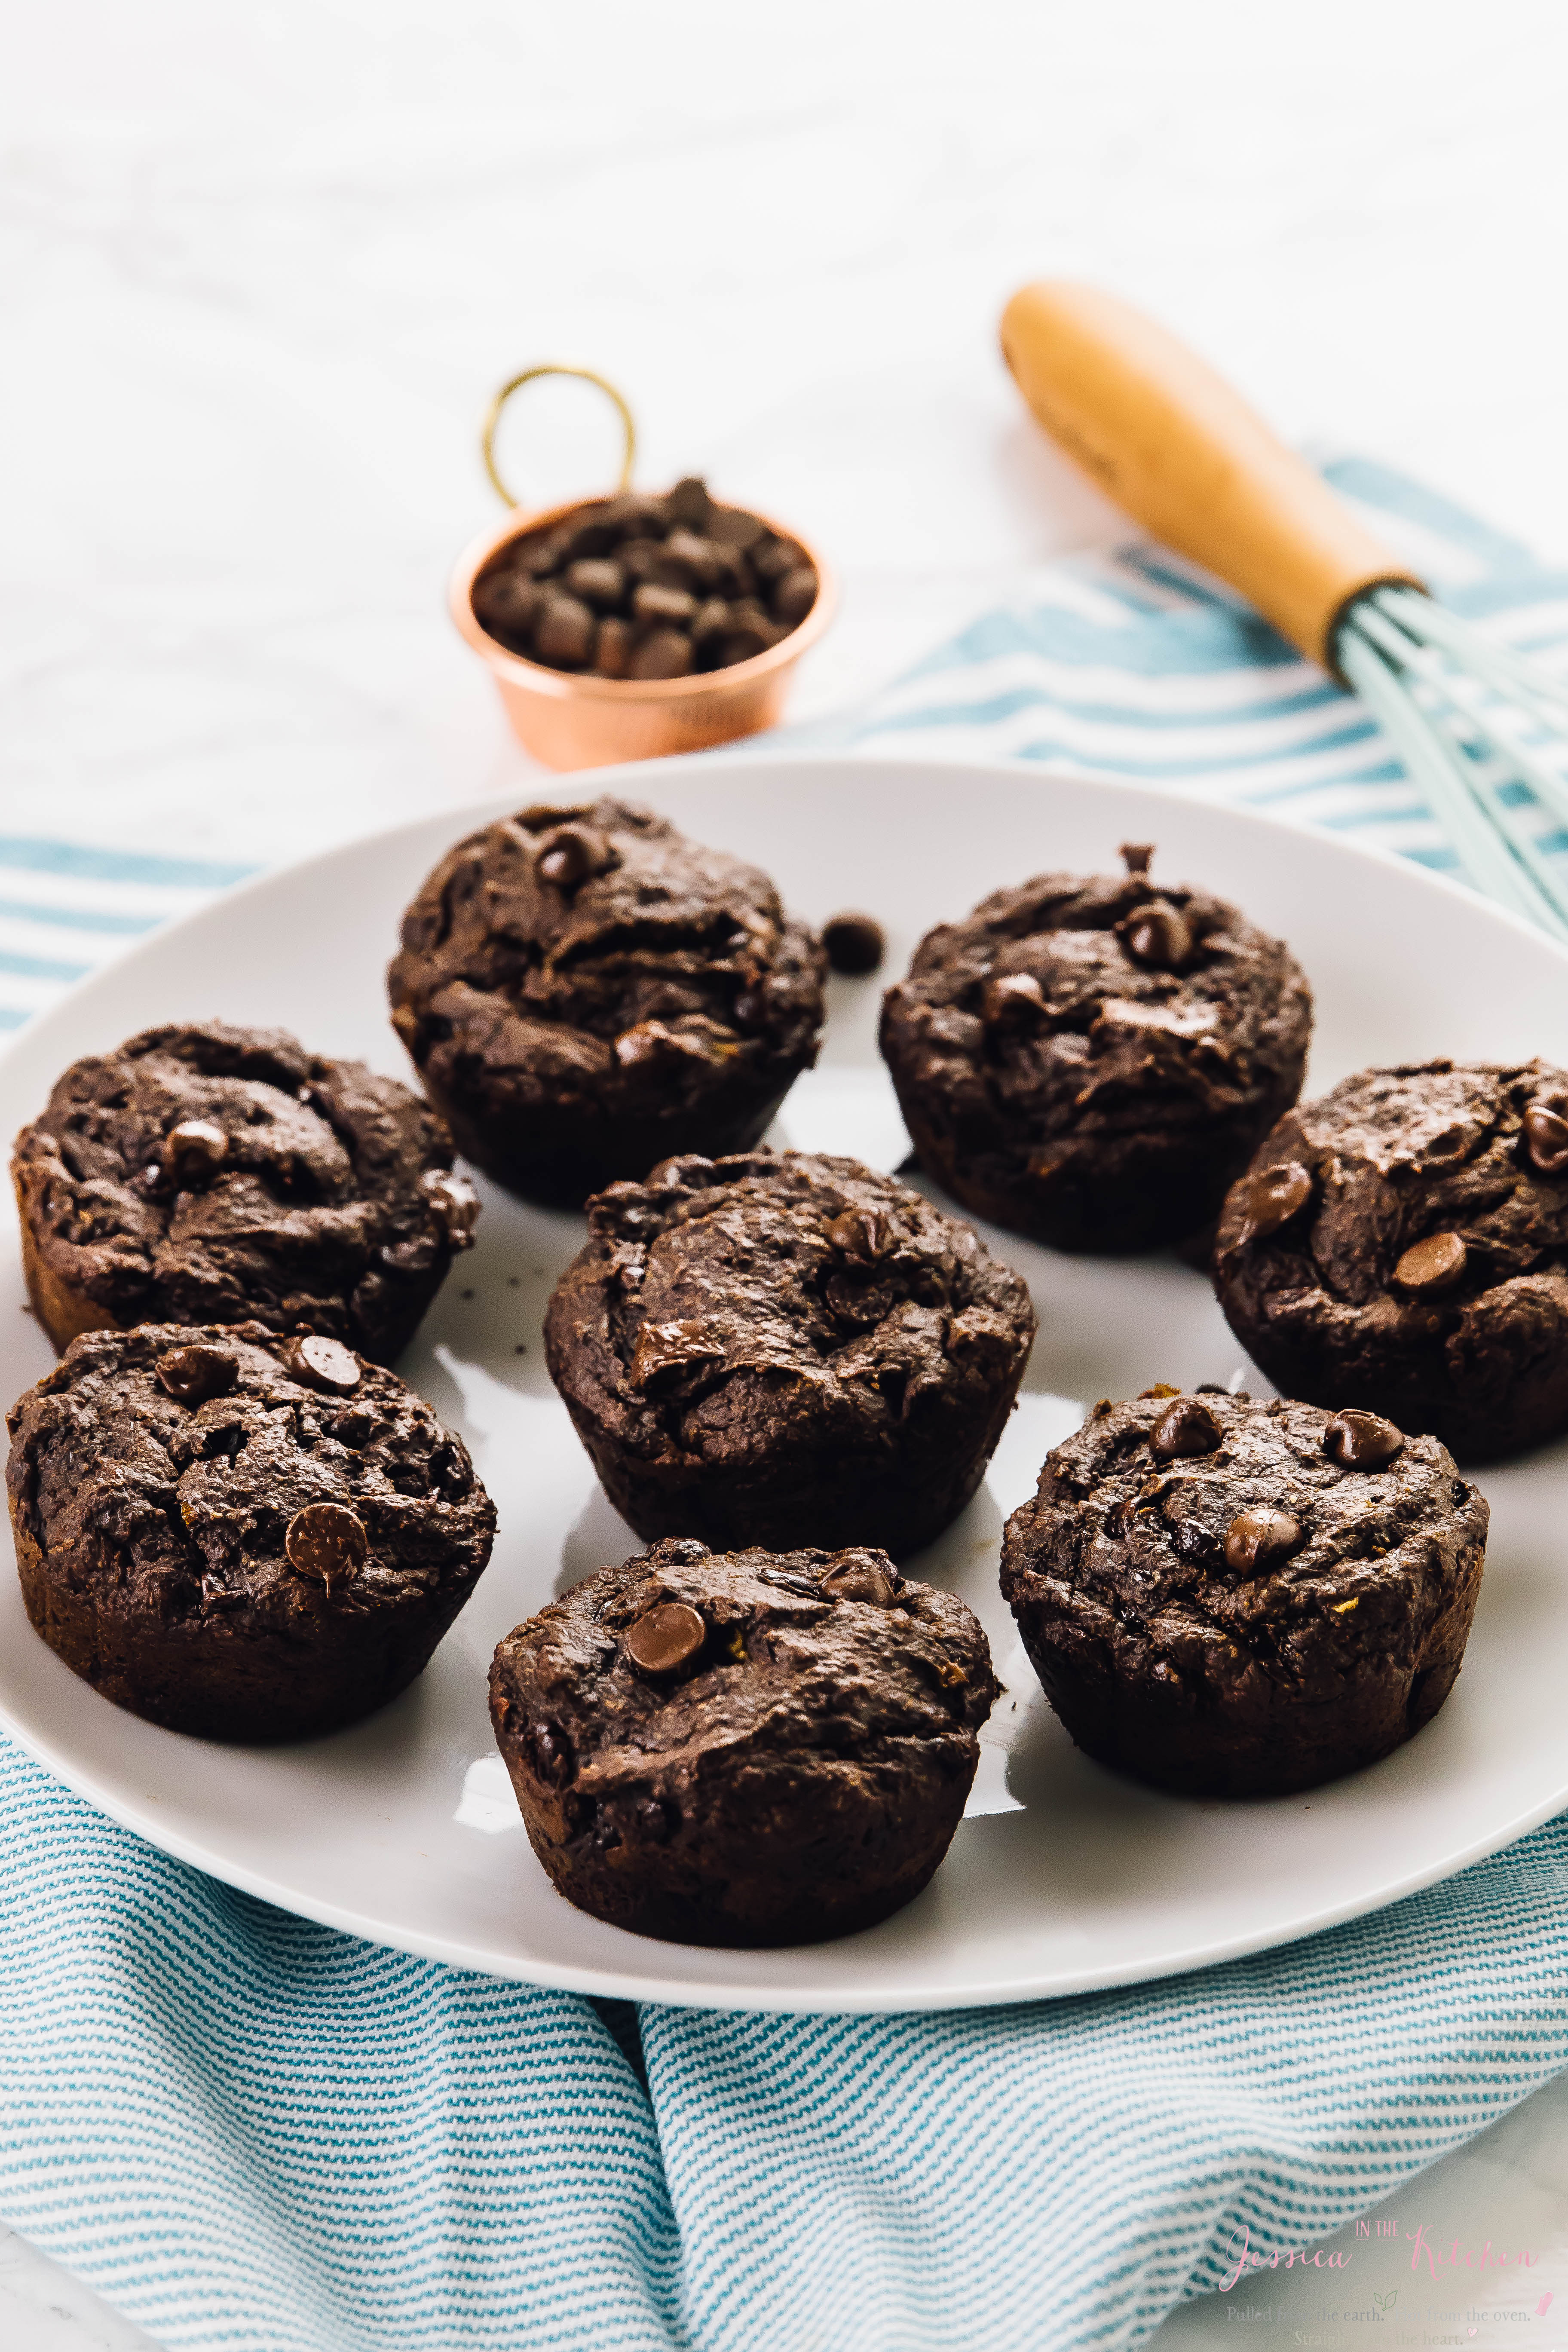 A plate full of chocolate banana muffins with a whisk in the background.